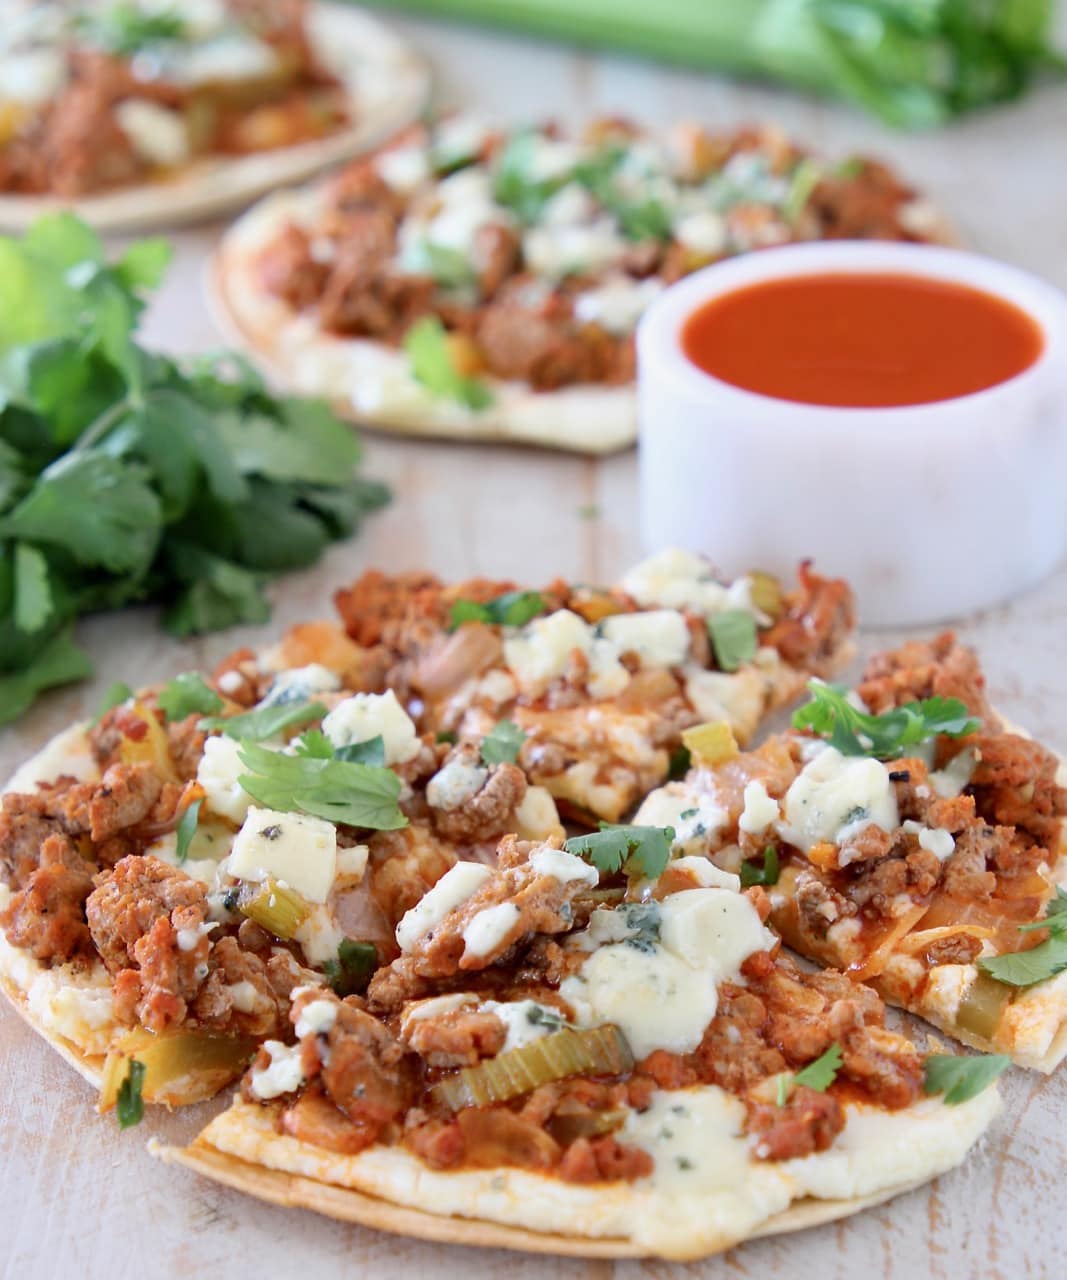 Buffalo ground turkey on flatbread topped with blue cheese crumbles